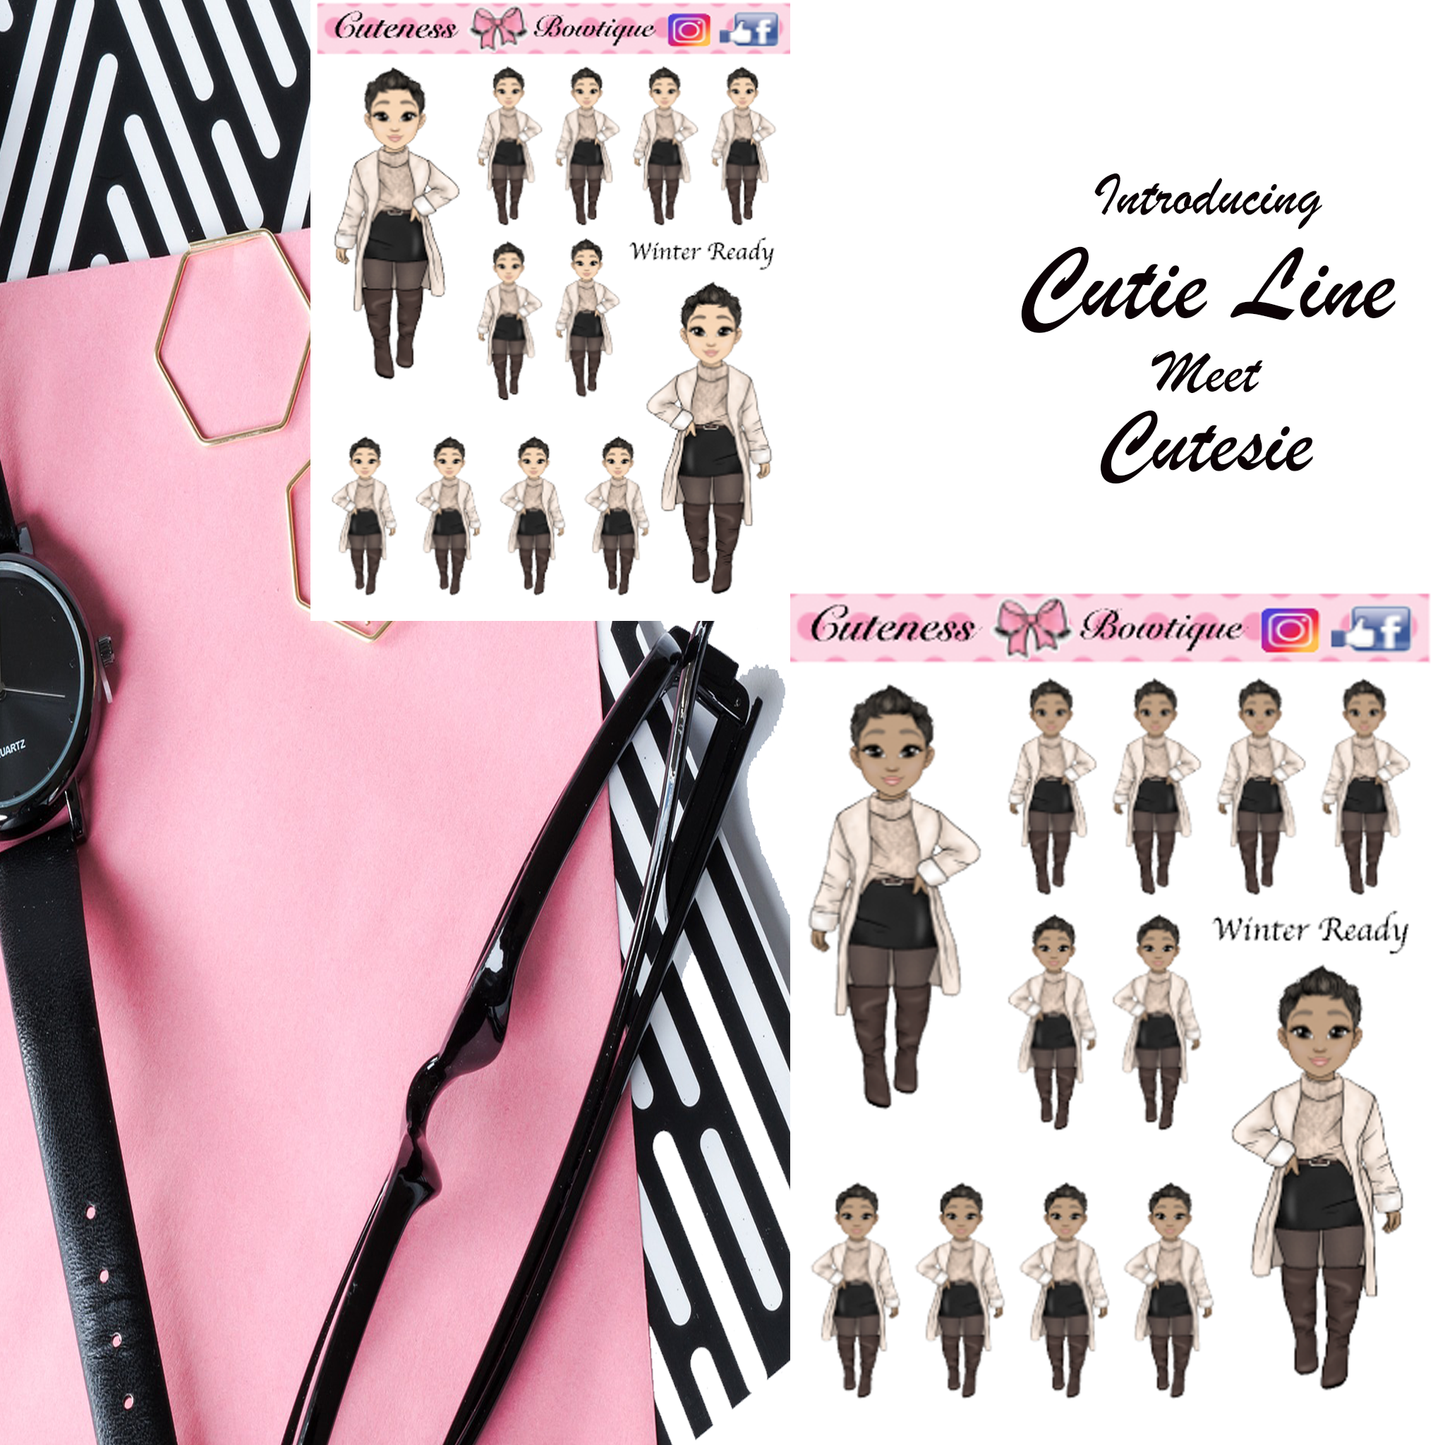 The Cutie Line Icon Sticker Sheet | Cuteness Planner Stickers for Agendas, Planners, Notebooks, Dividers | WINTER READY